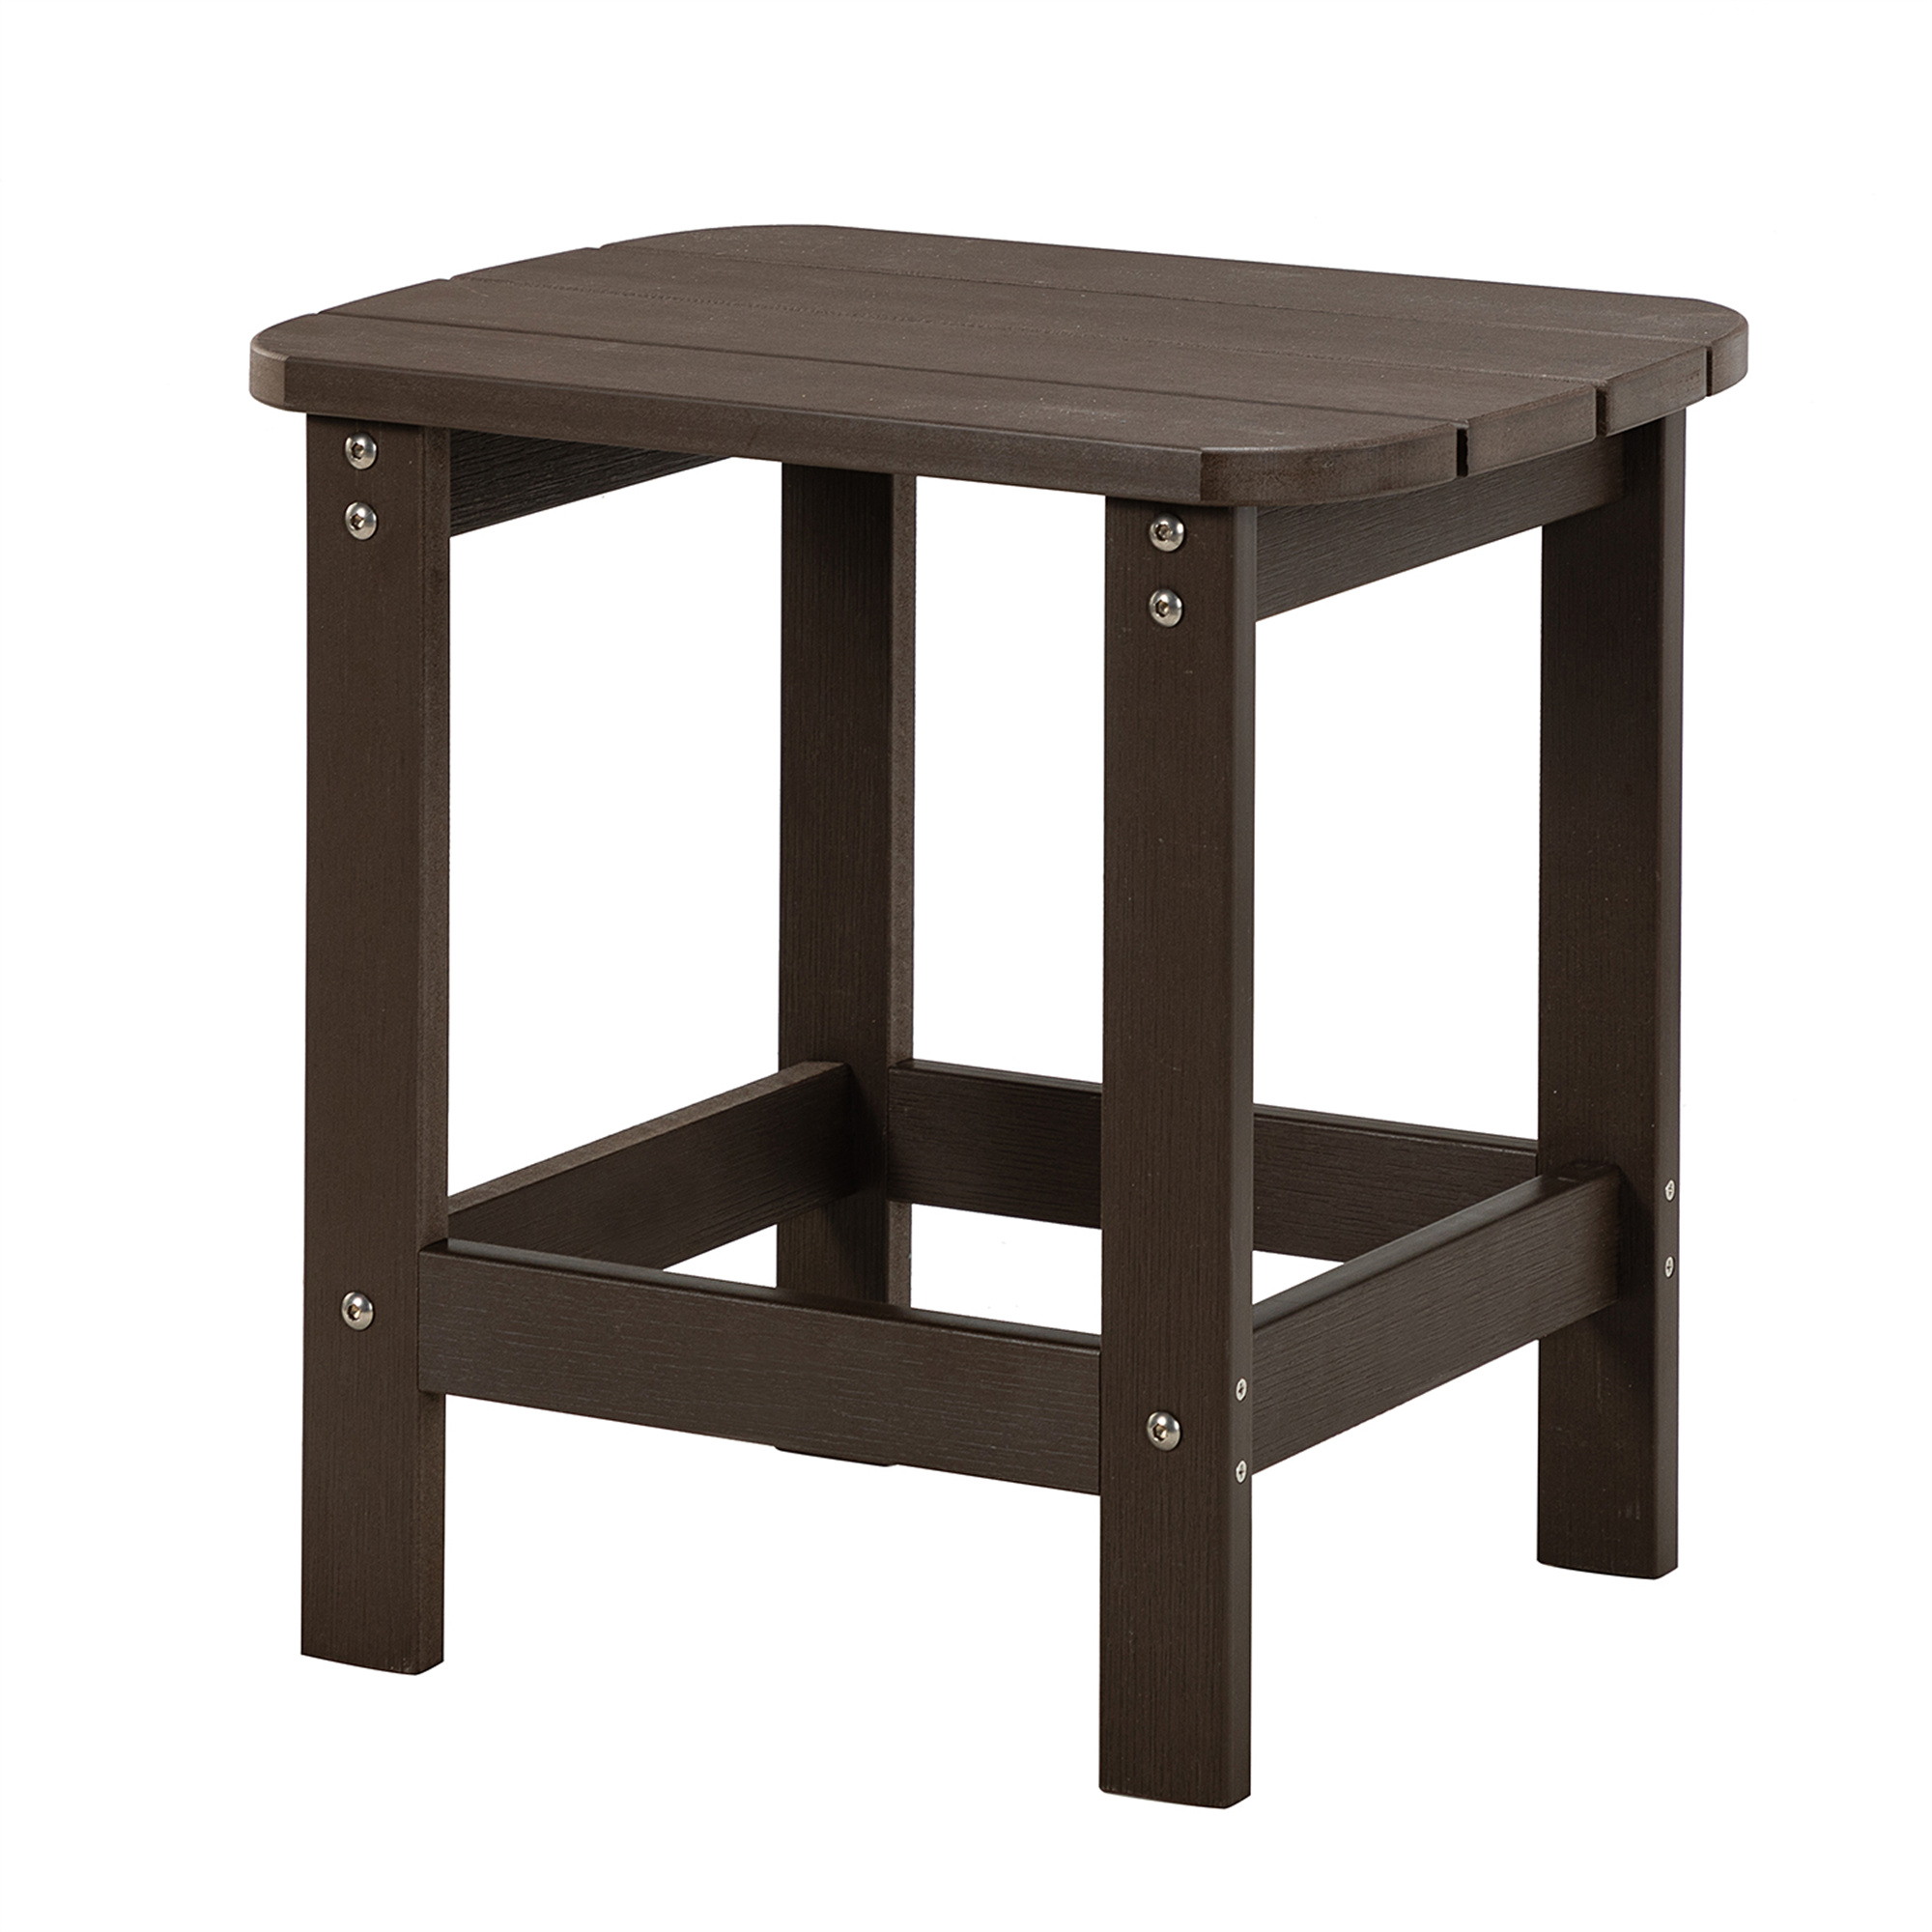 Cfowner Square Outdoor Side Table, Pool Composite Patio Table, End Tables for Backyard, Easy Maintenance, Brown - image 2 of 7